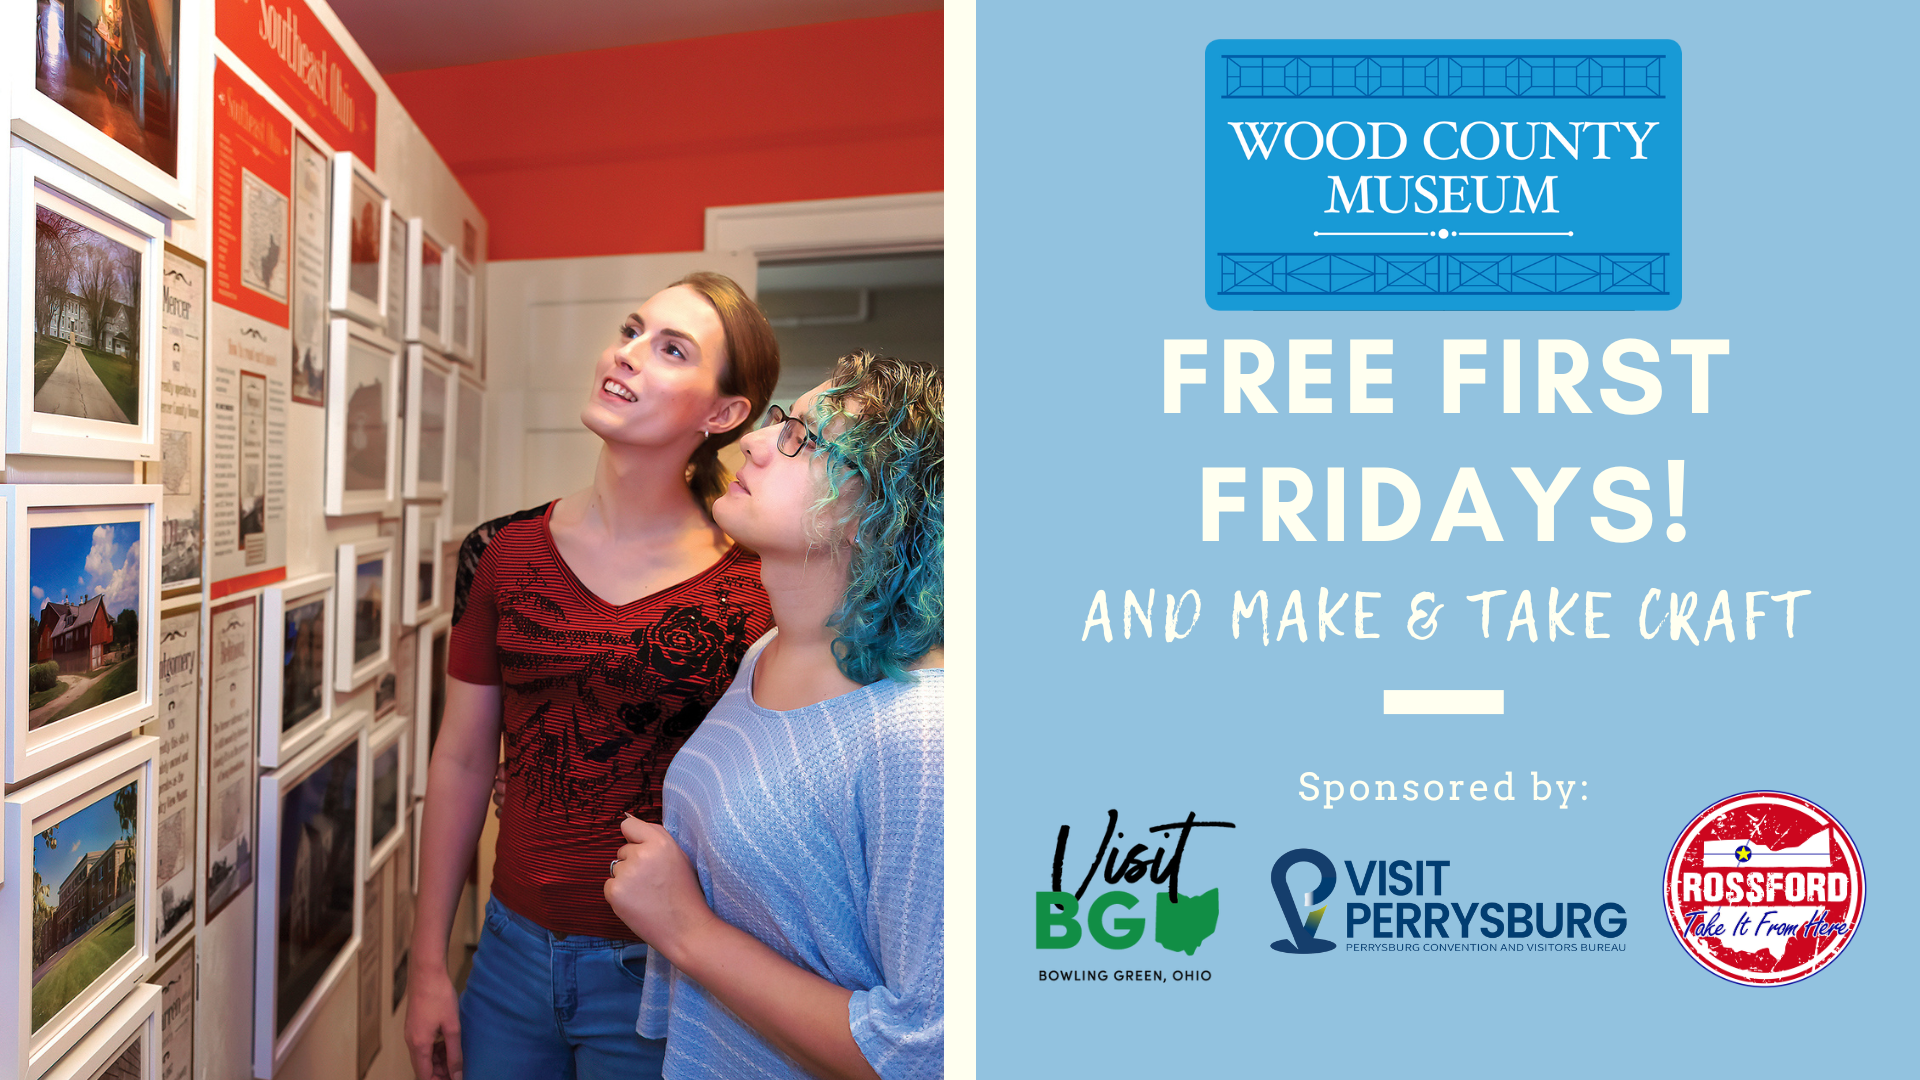 Join us for Free First Fridays!